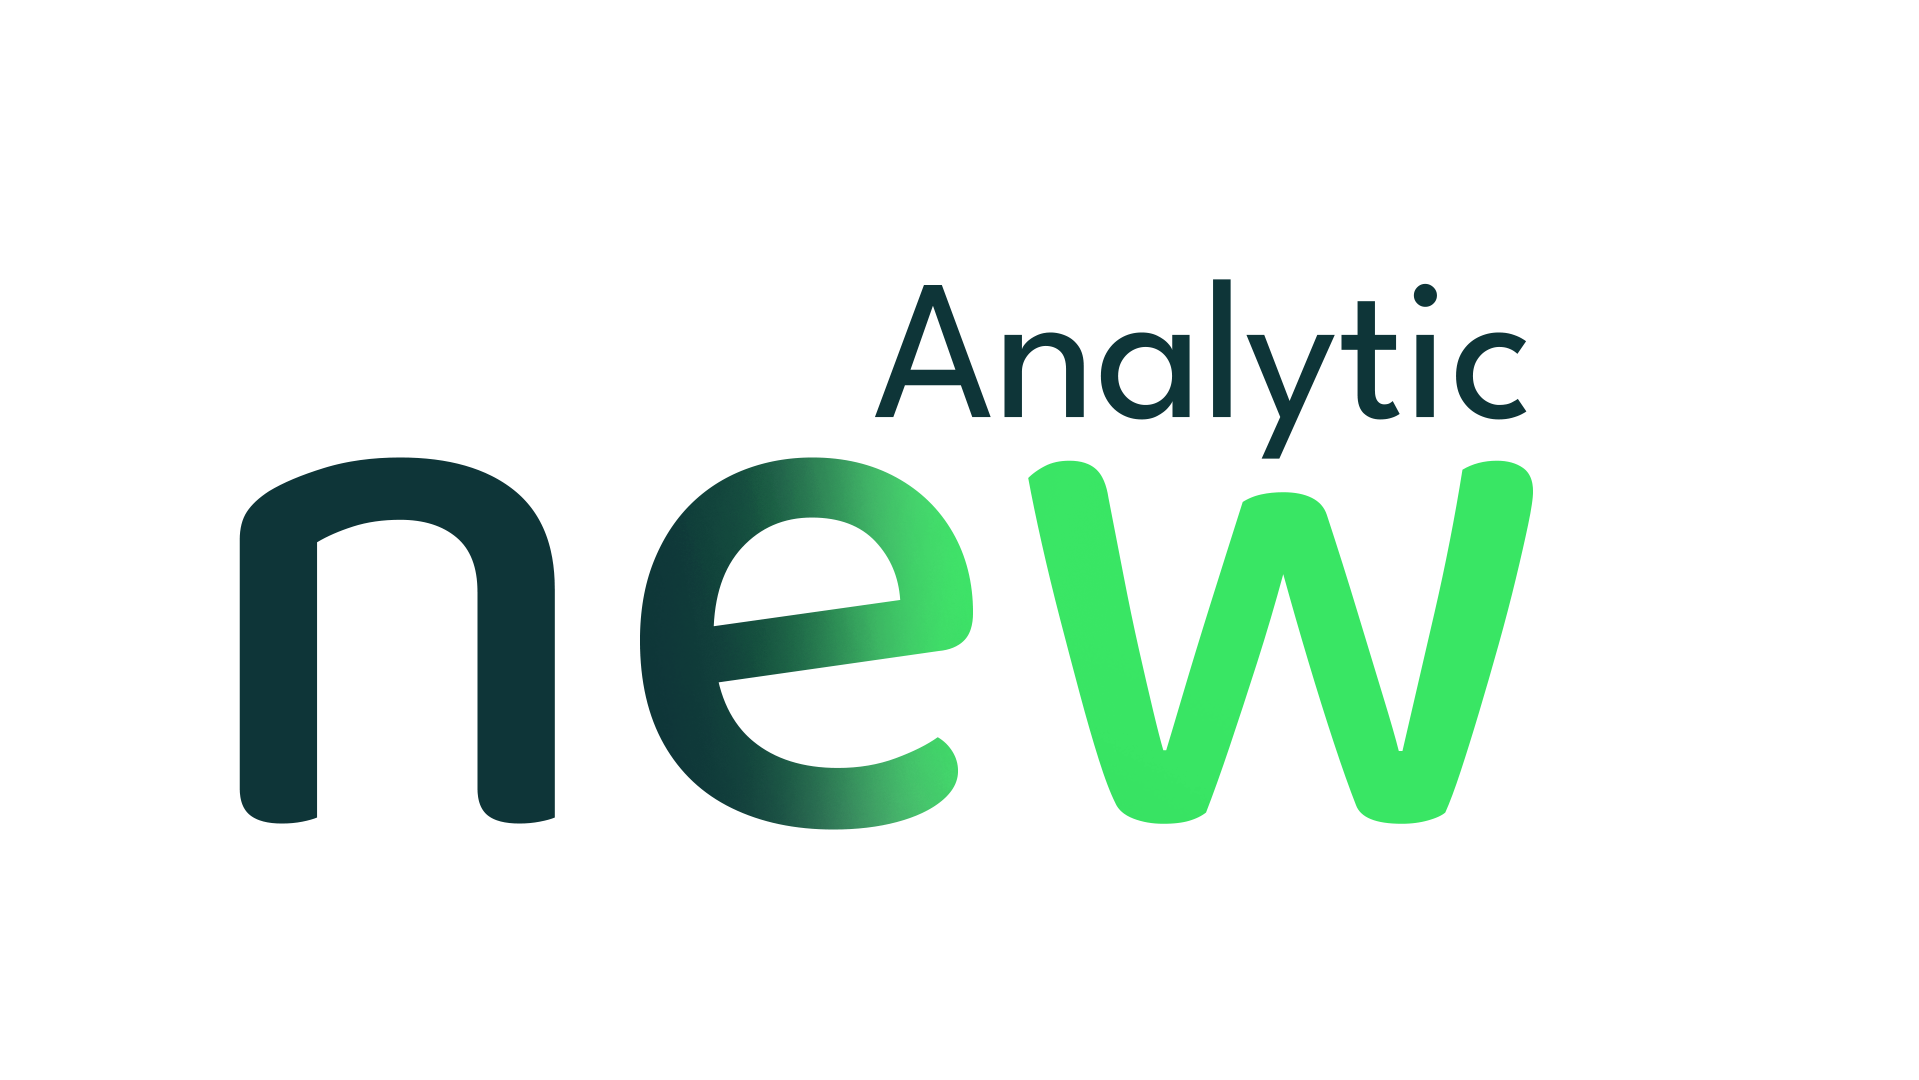 logo-analytic-NEW-alta-color 01